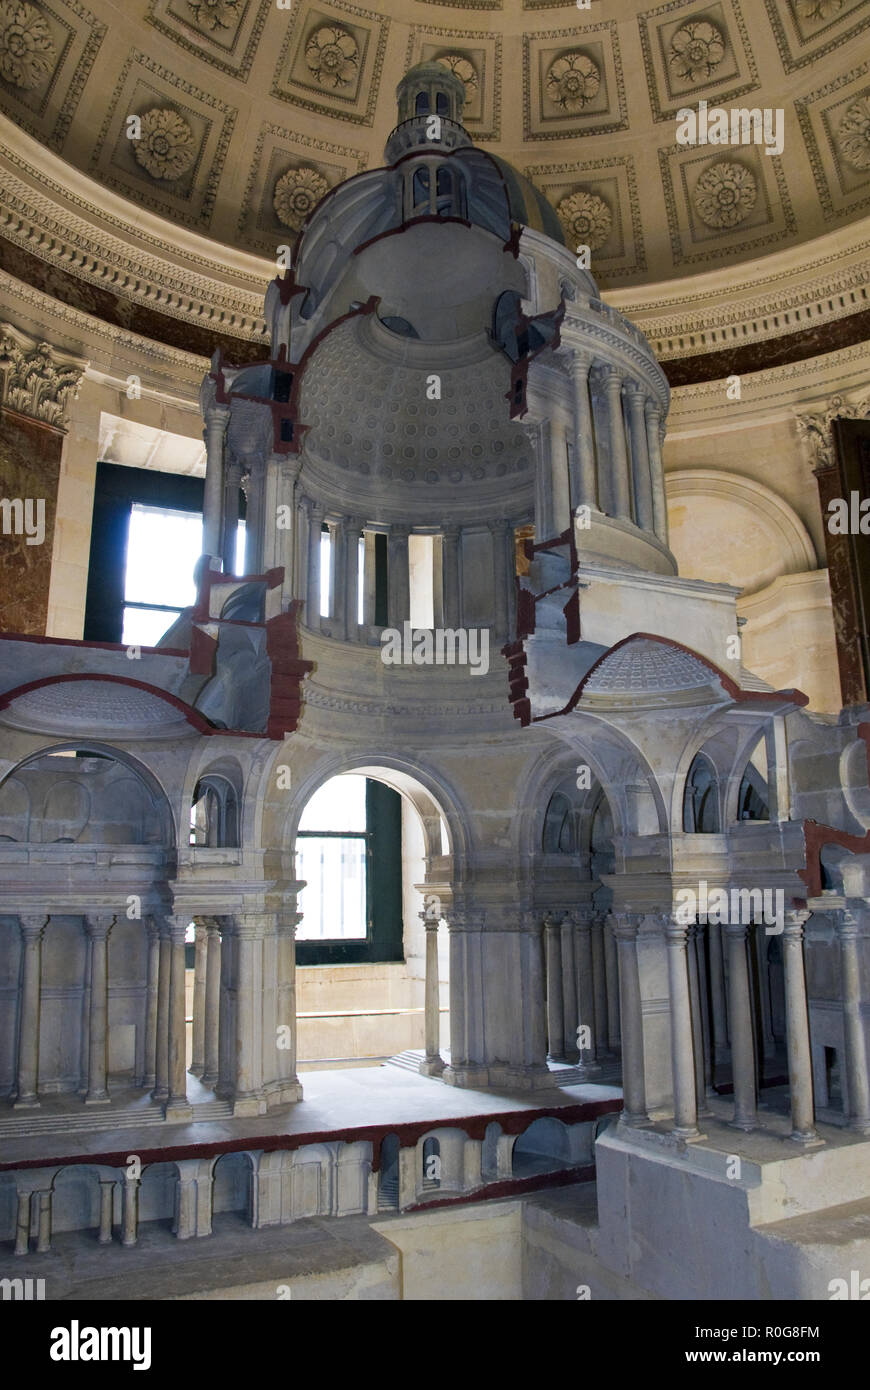 An architectural model of the Pantheon, displayed at the Pantheon, a mausoleum housing the tombs of famous French citizens, Paris, France. Stock Photo